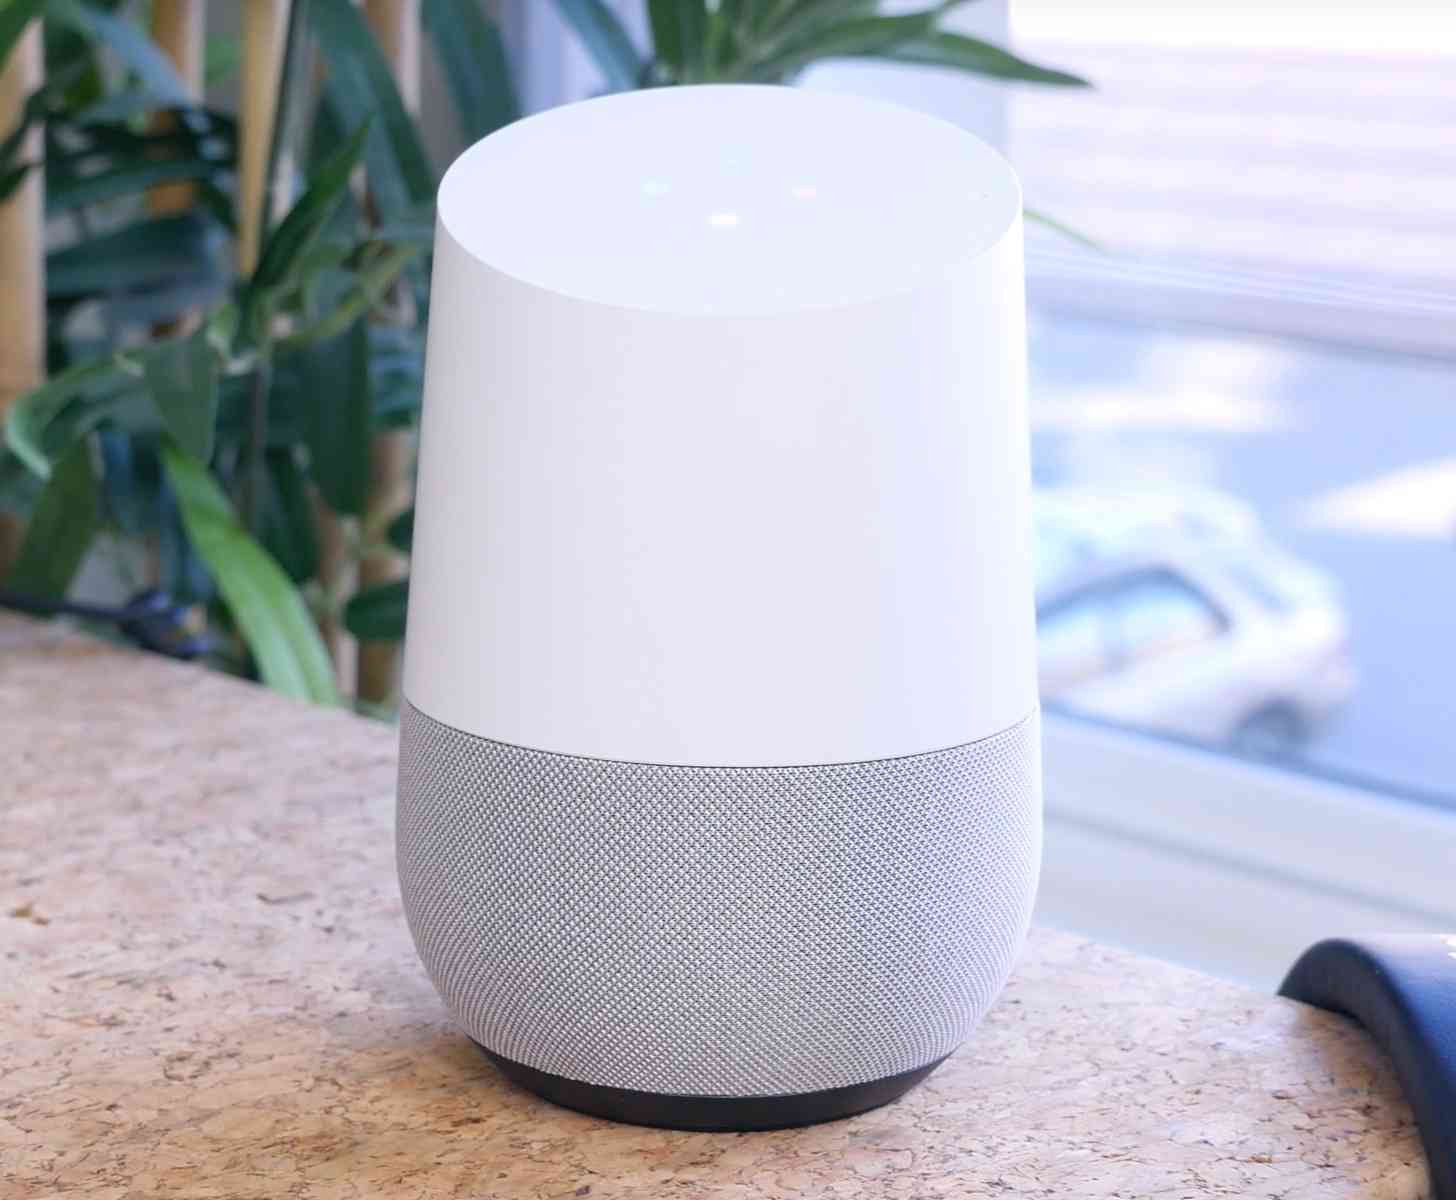 Google Home hands-on video review